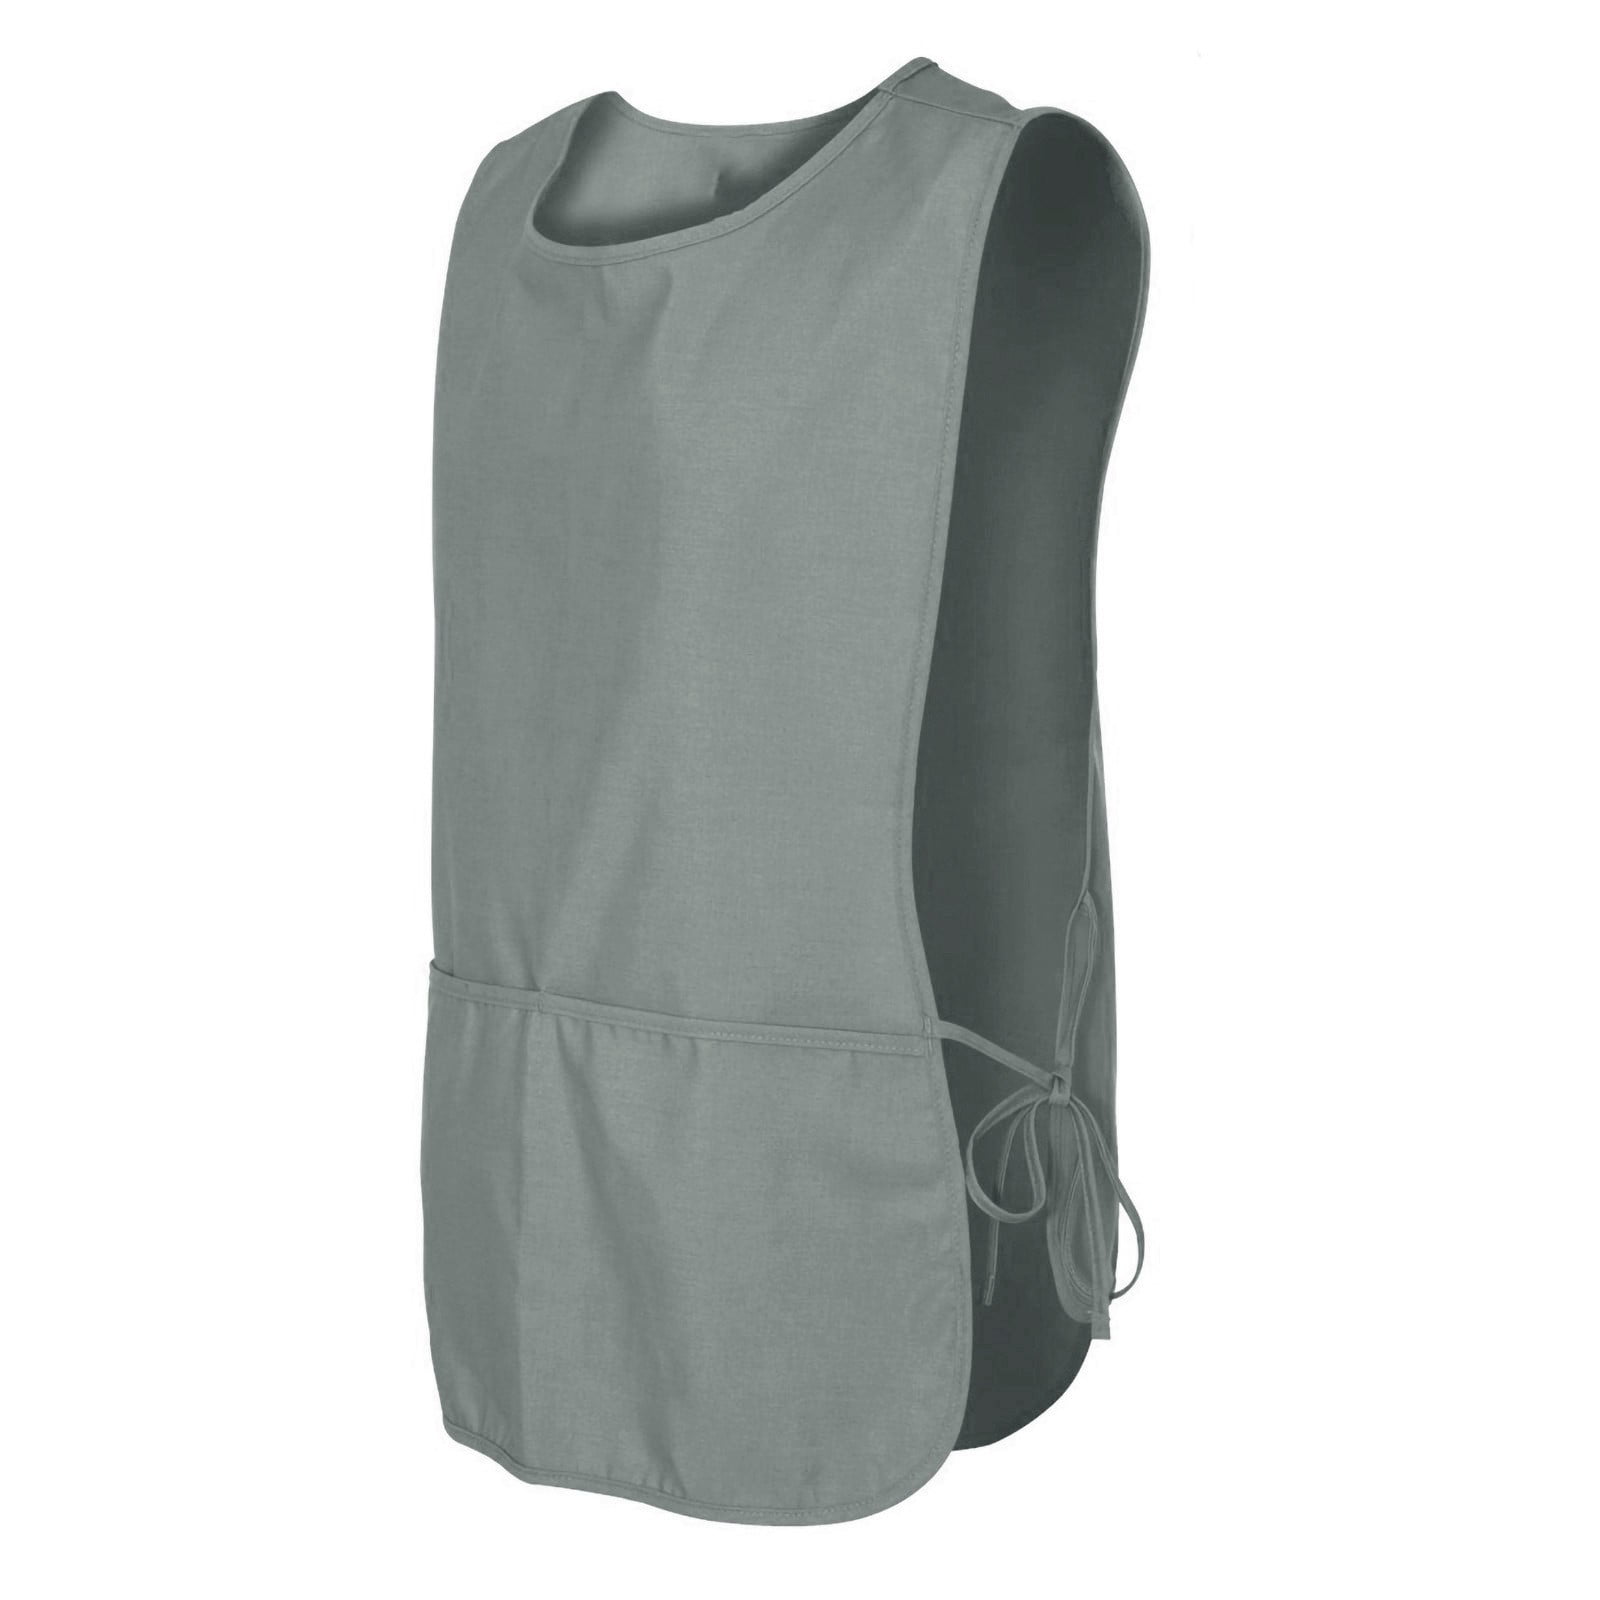 Ladies Tabard Work Smock Over The Head Apron Cooking Cleaning Sleeveless Wear 